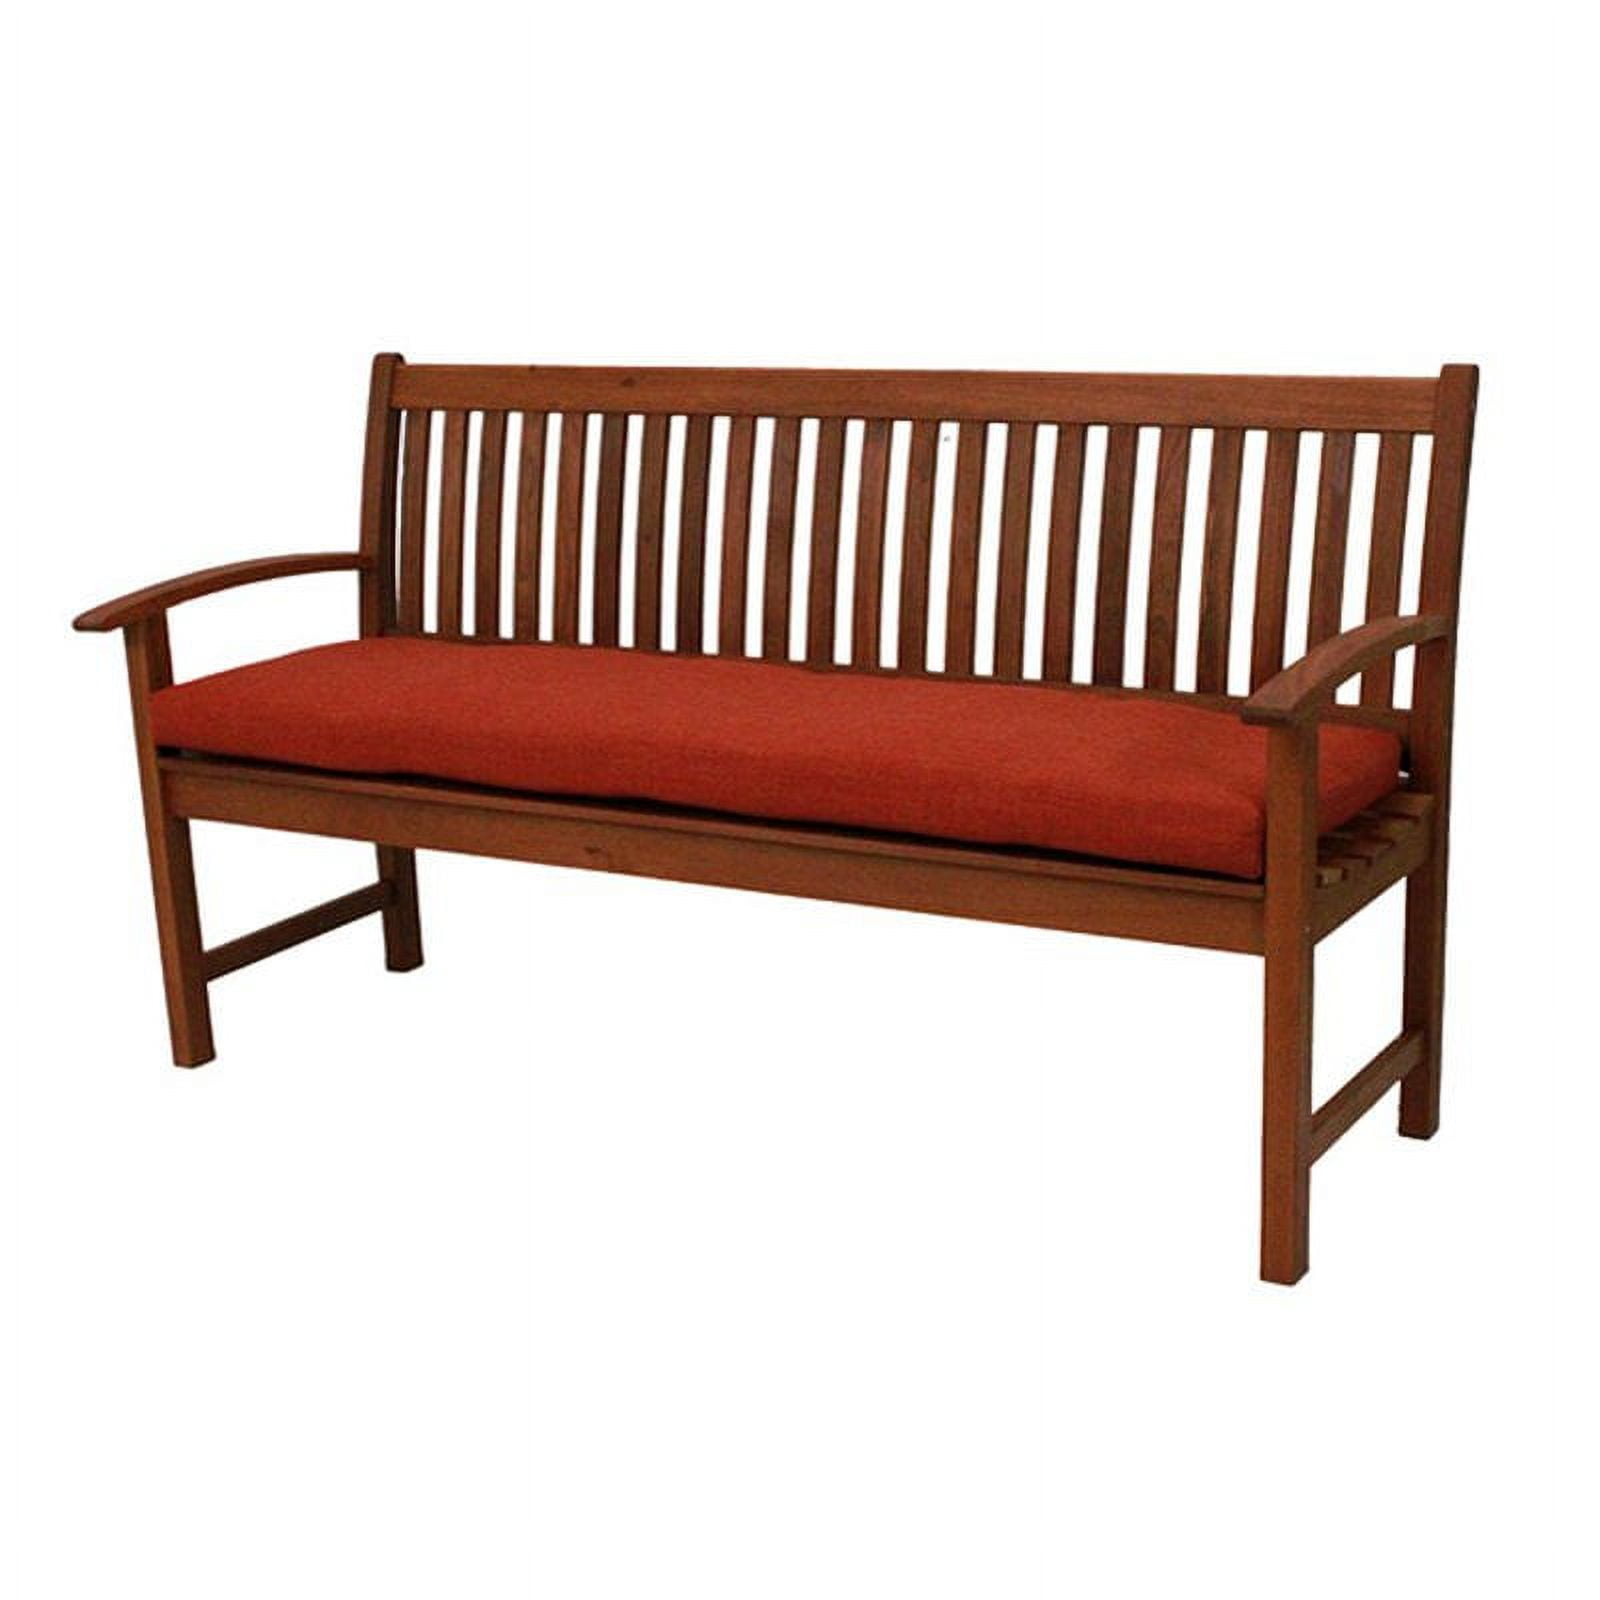 Blazing Needles 60x19 Inch Twill 3 Seater Bench Cushion for sale online